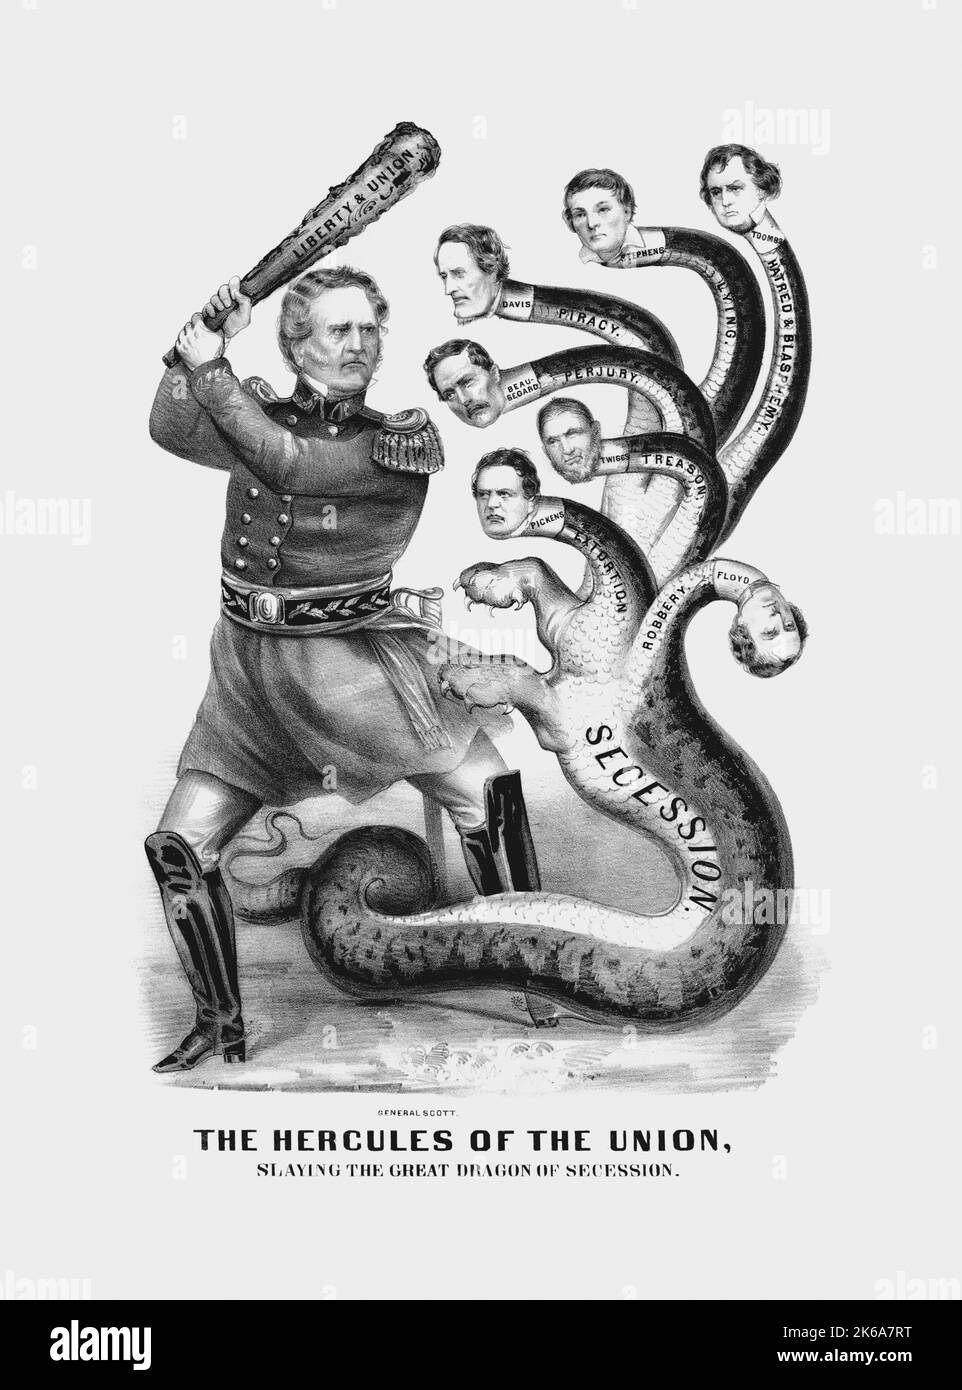 General Winfield Scott of the Union Army, depicted as Hercules slaying the great dragon of secession. Stock Photo